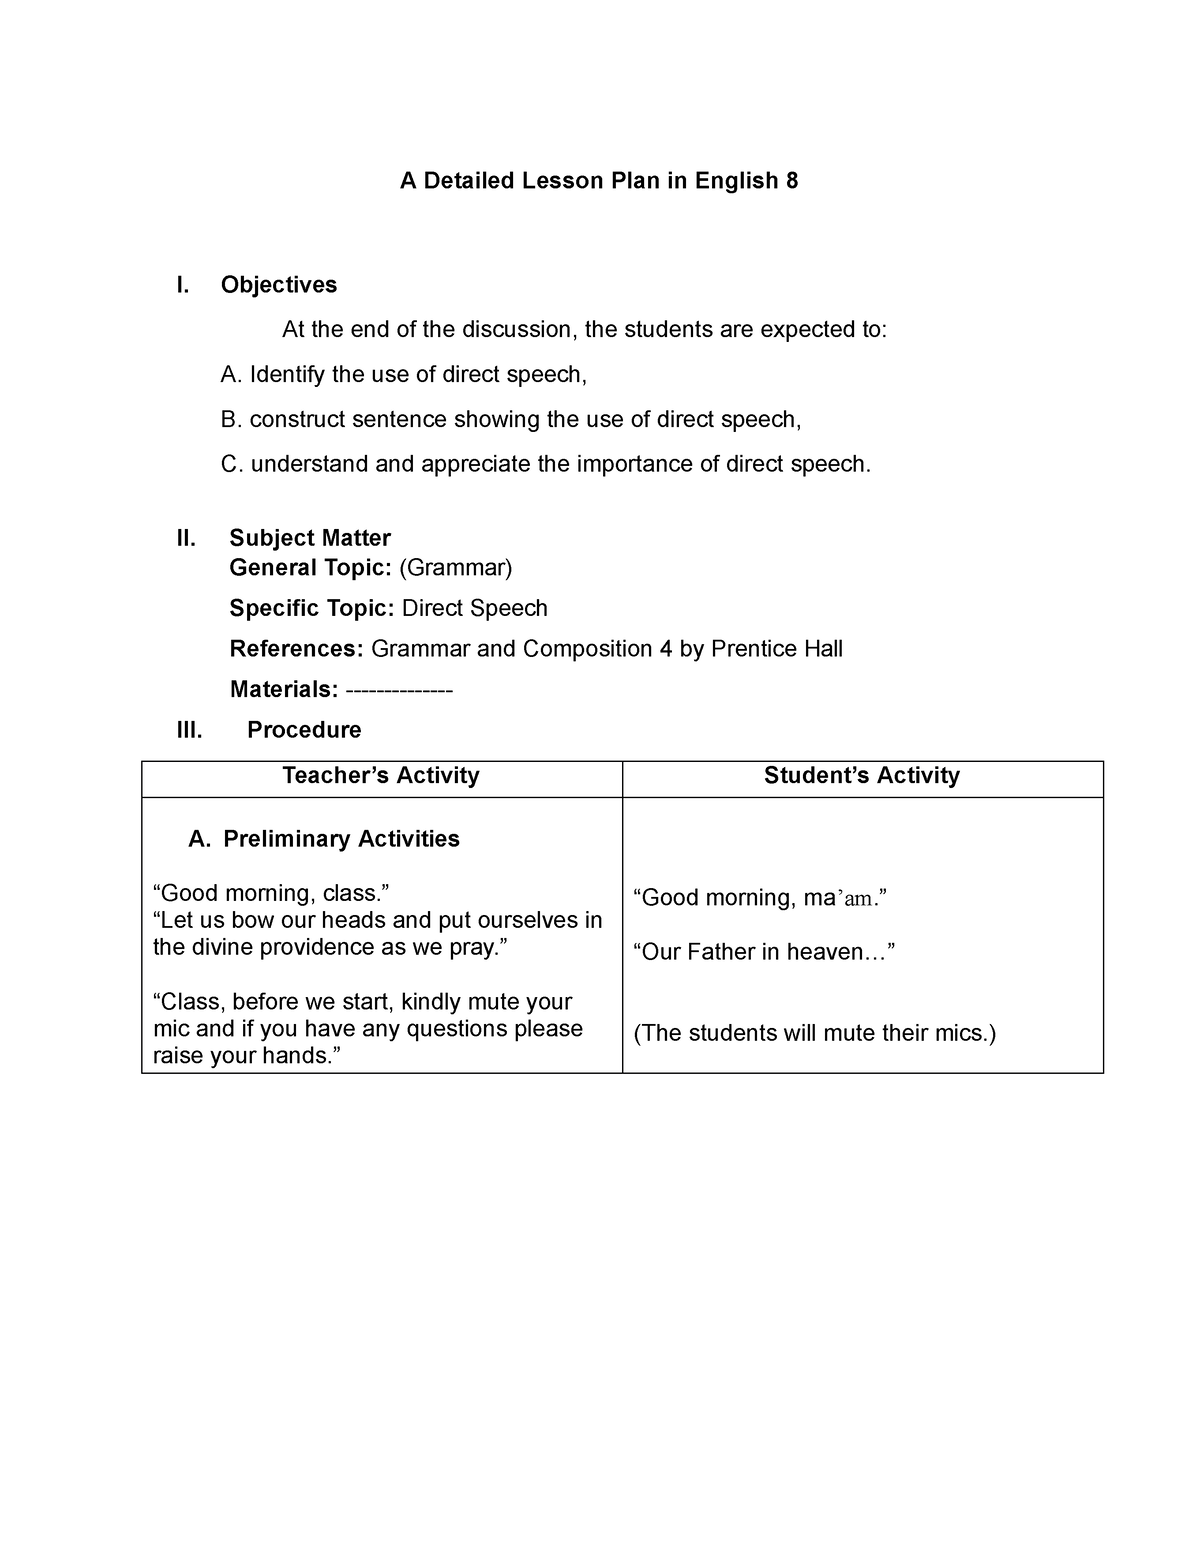 Direct Speech - LESSON PLAN IN ENGLISH - A Detailed Lesson Plan in ...